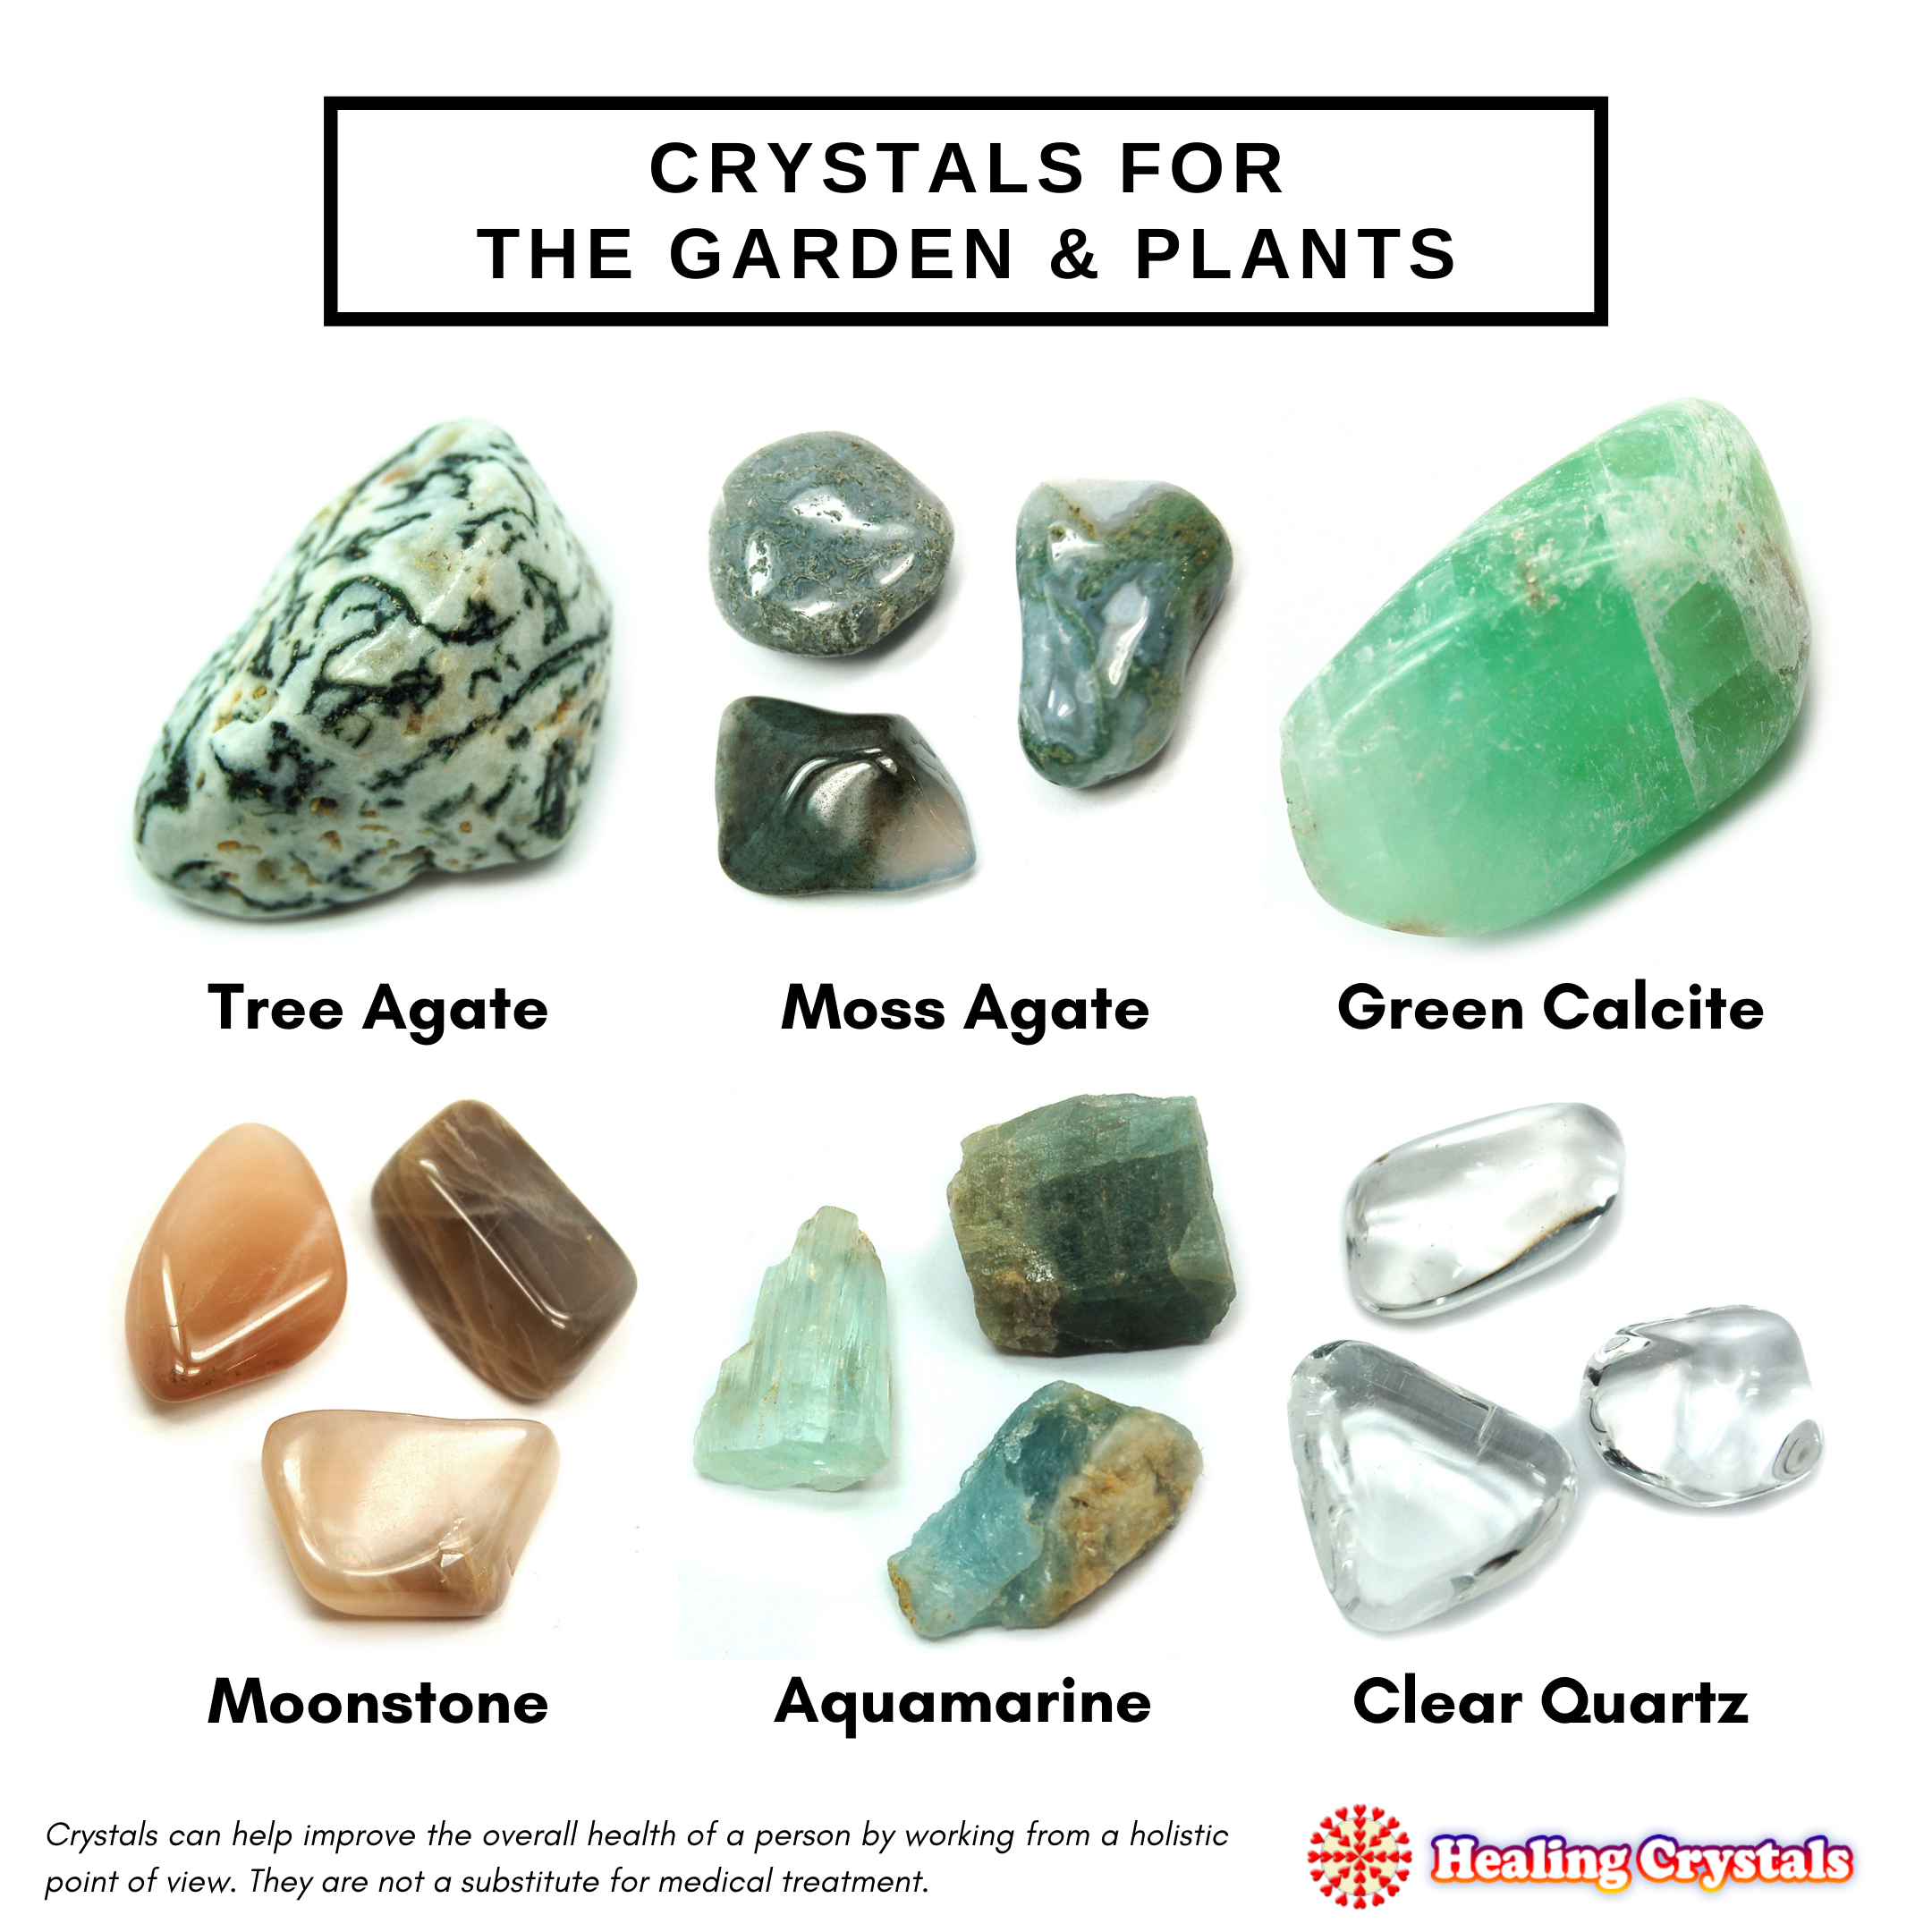 Crystals for the garden and plants